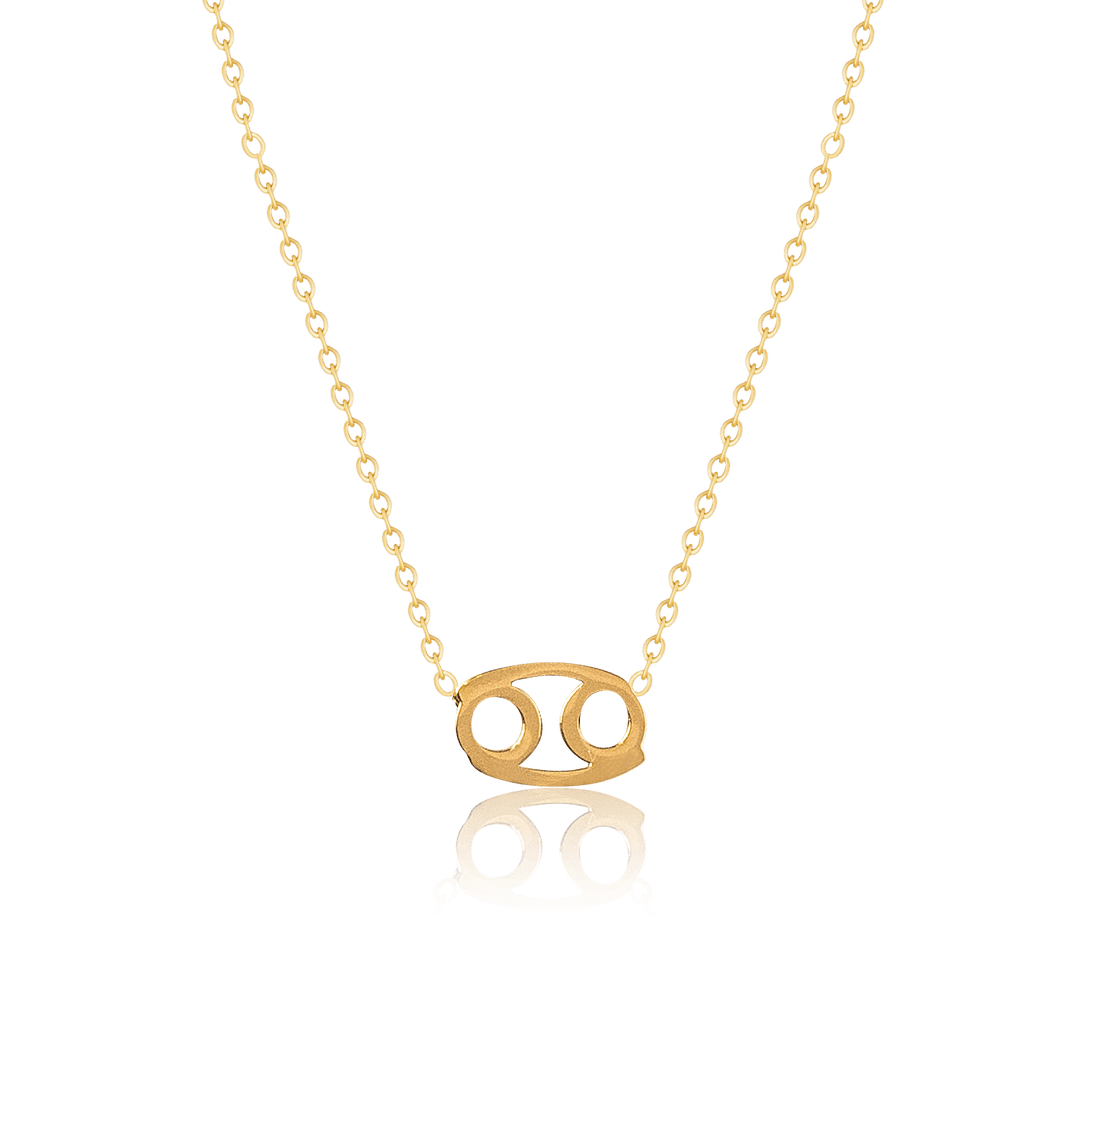 bianco rosso Necklaces Gold Cancer - Necklace cyprus greece jewelry gift free shipping europe worldwide